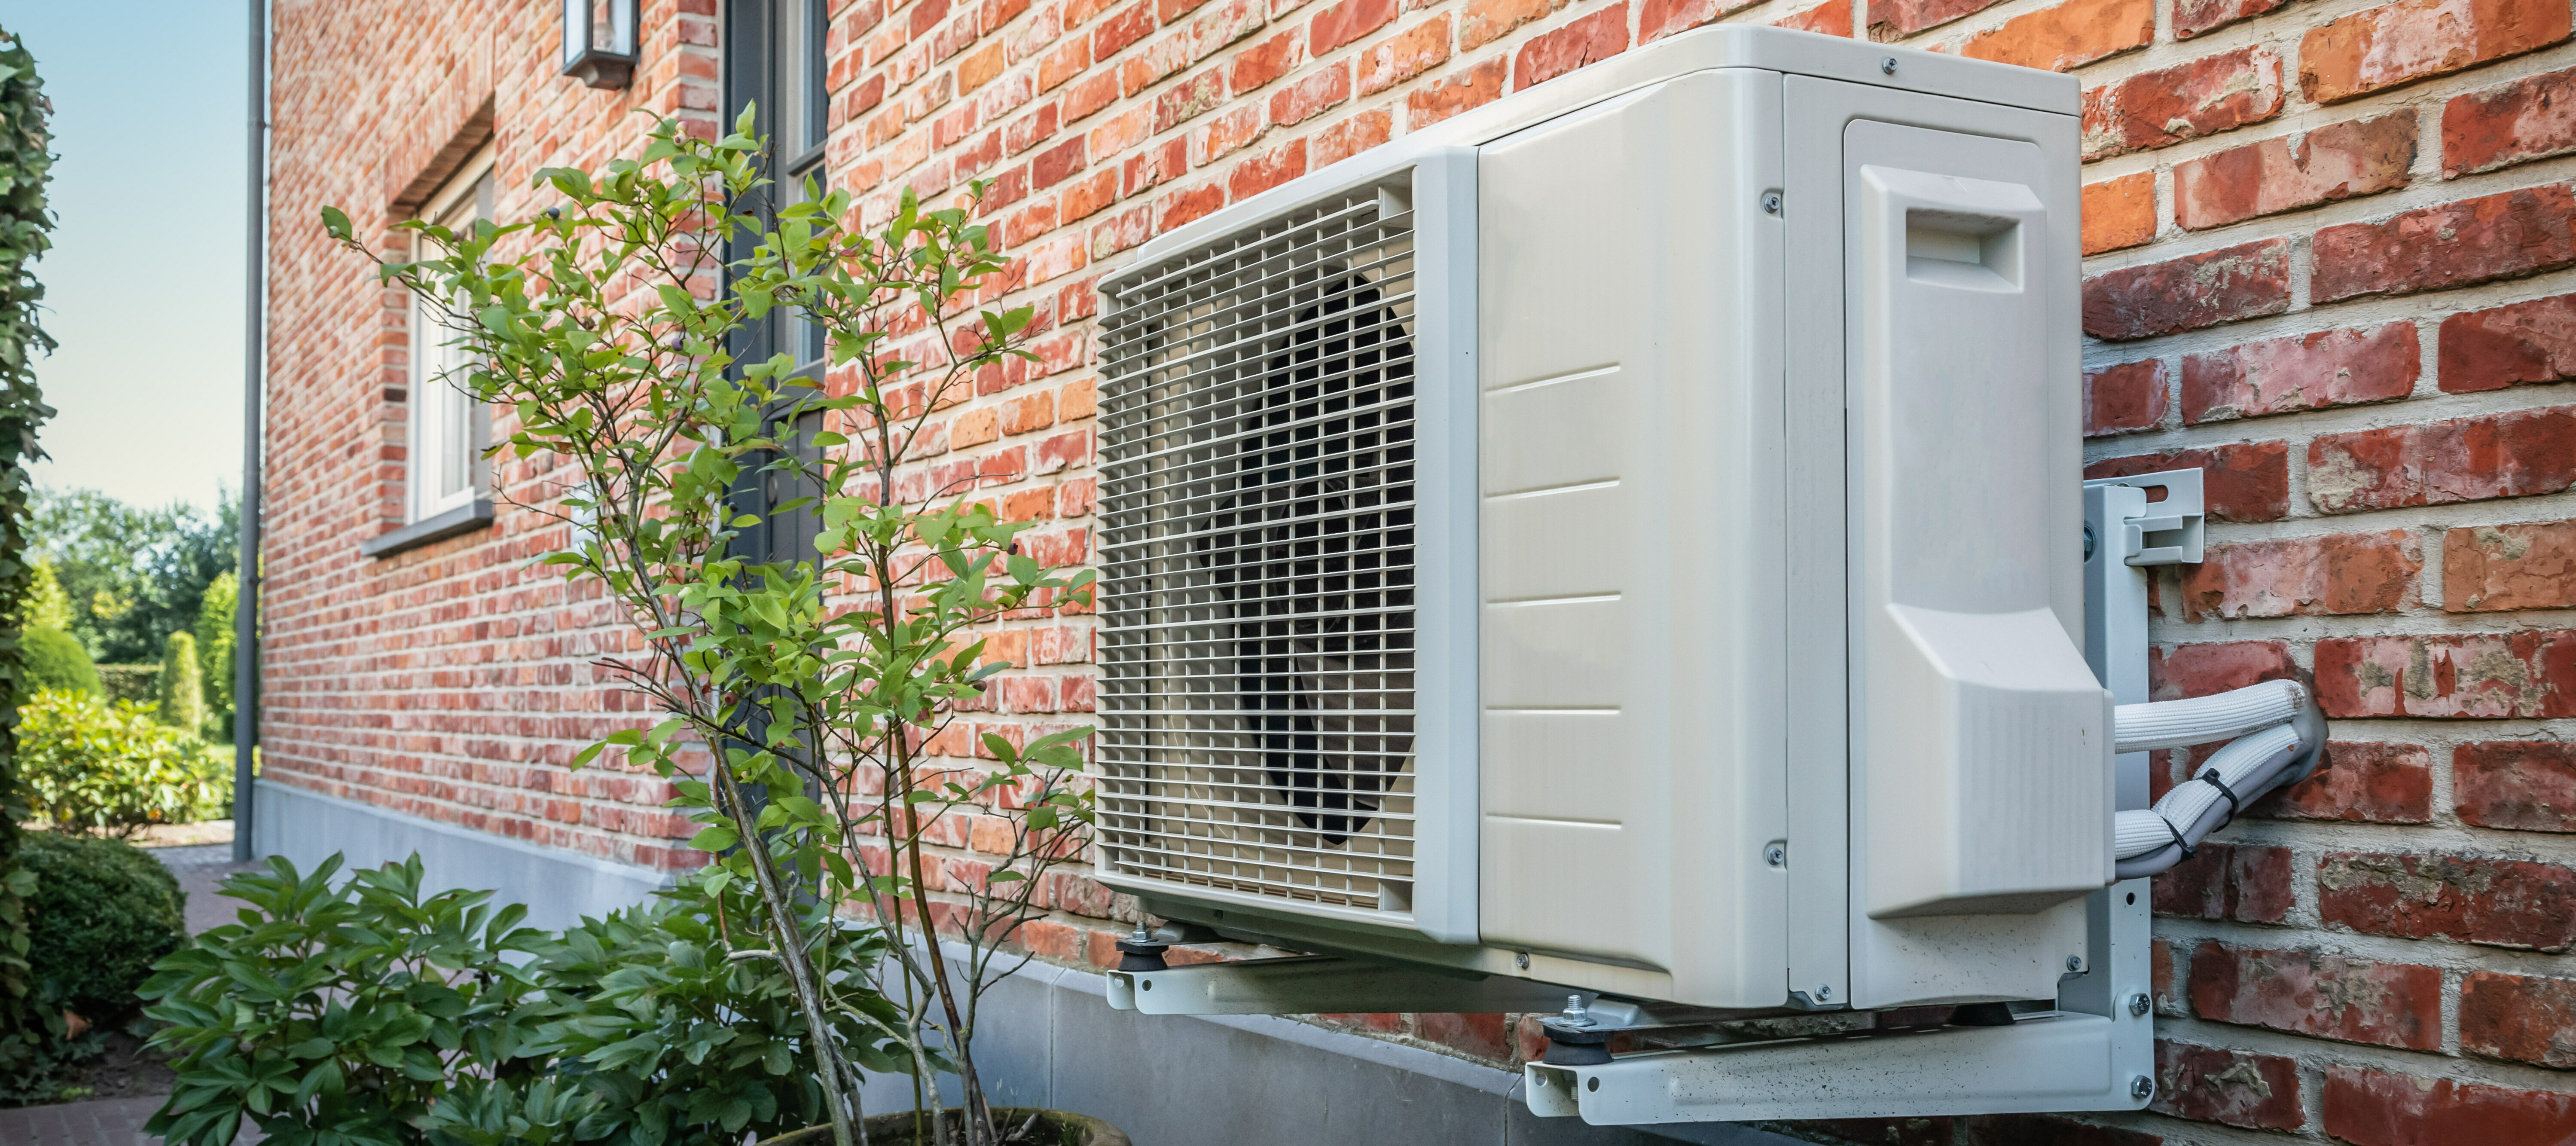 Share your heat pump experience